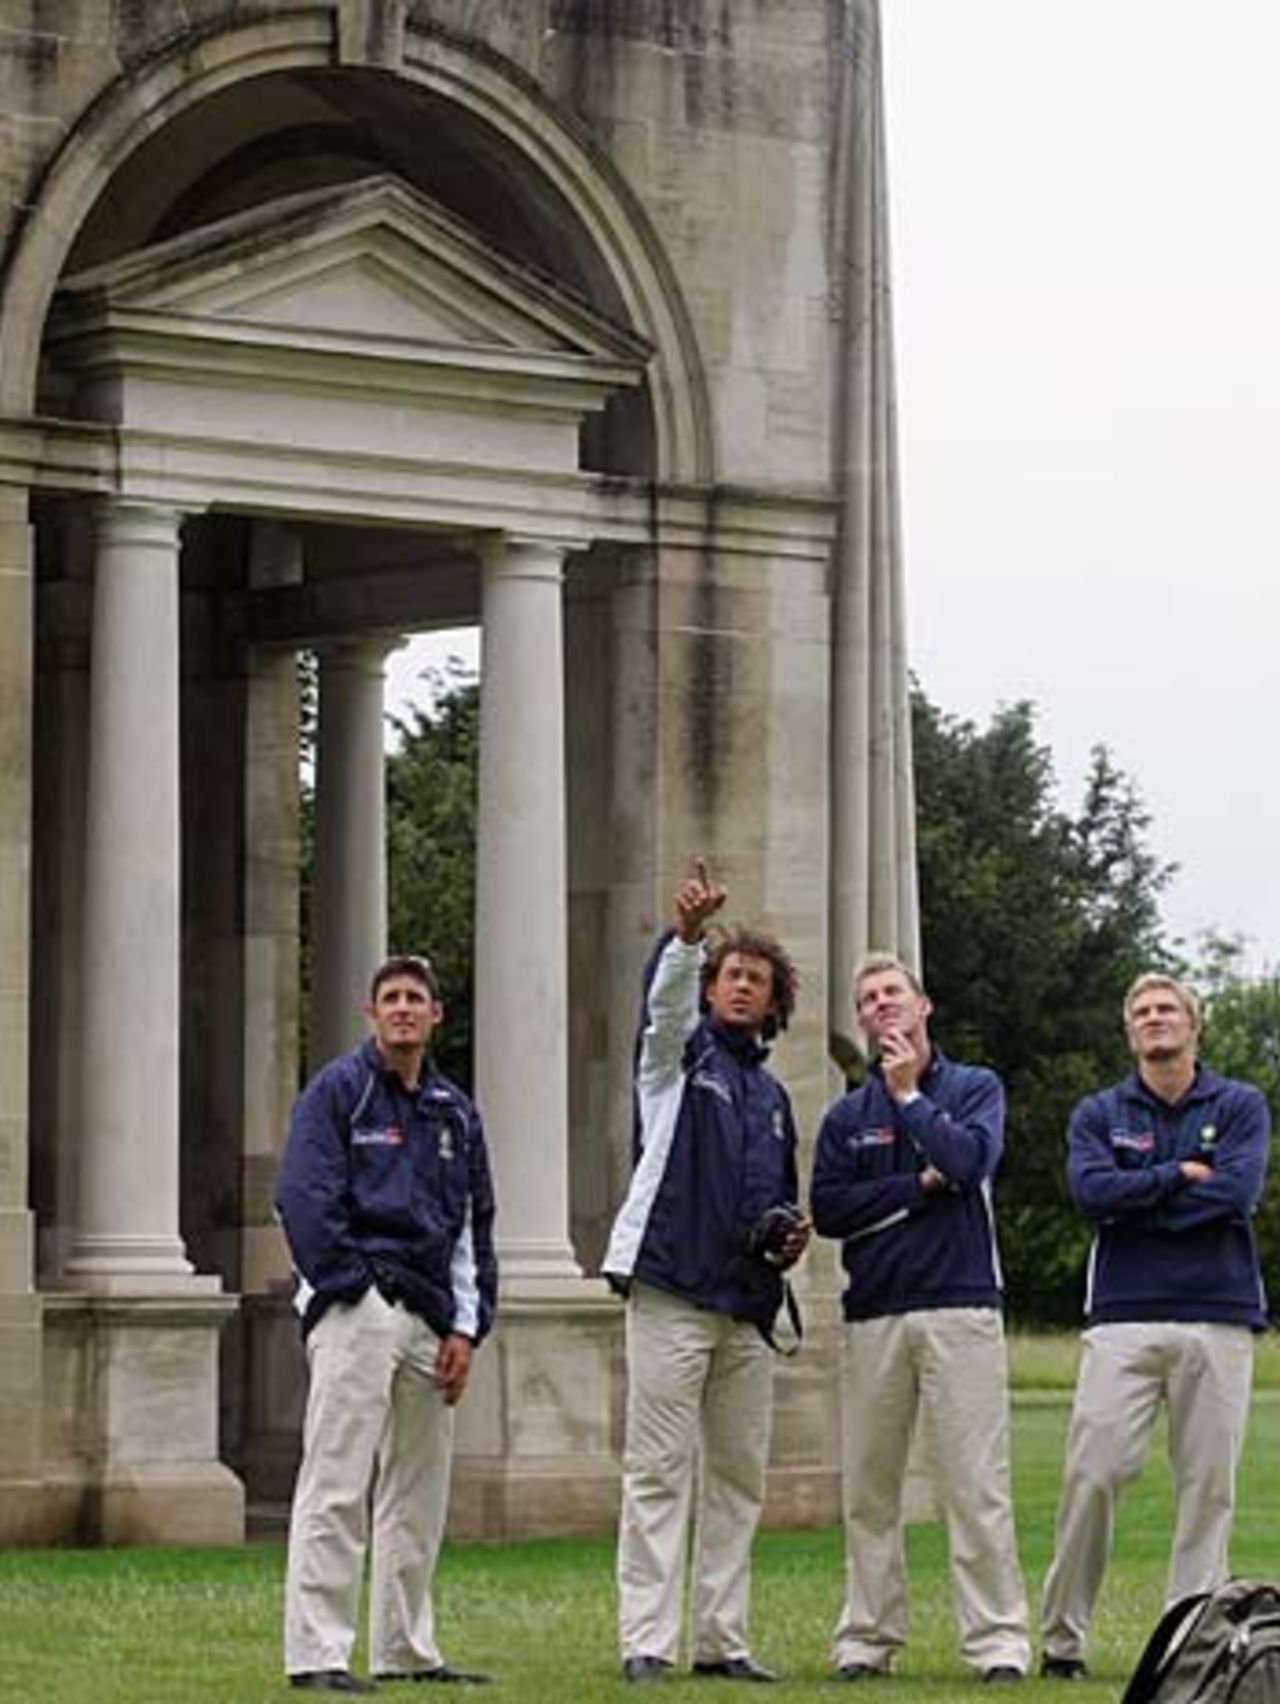 Australia's players at the Australian World War I Memorial and Cemetery near Villers-Bretonneux in northern France, June 6, 2005